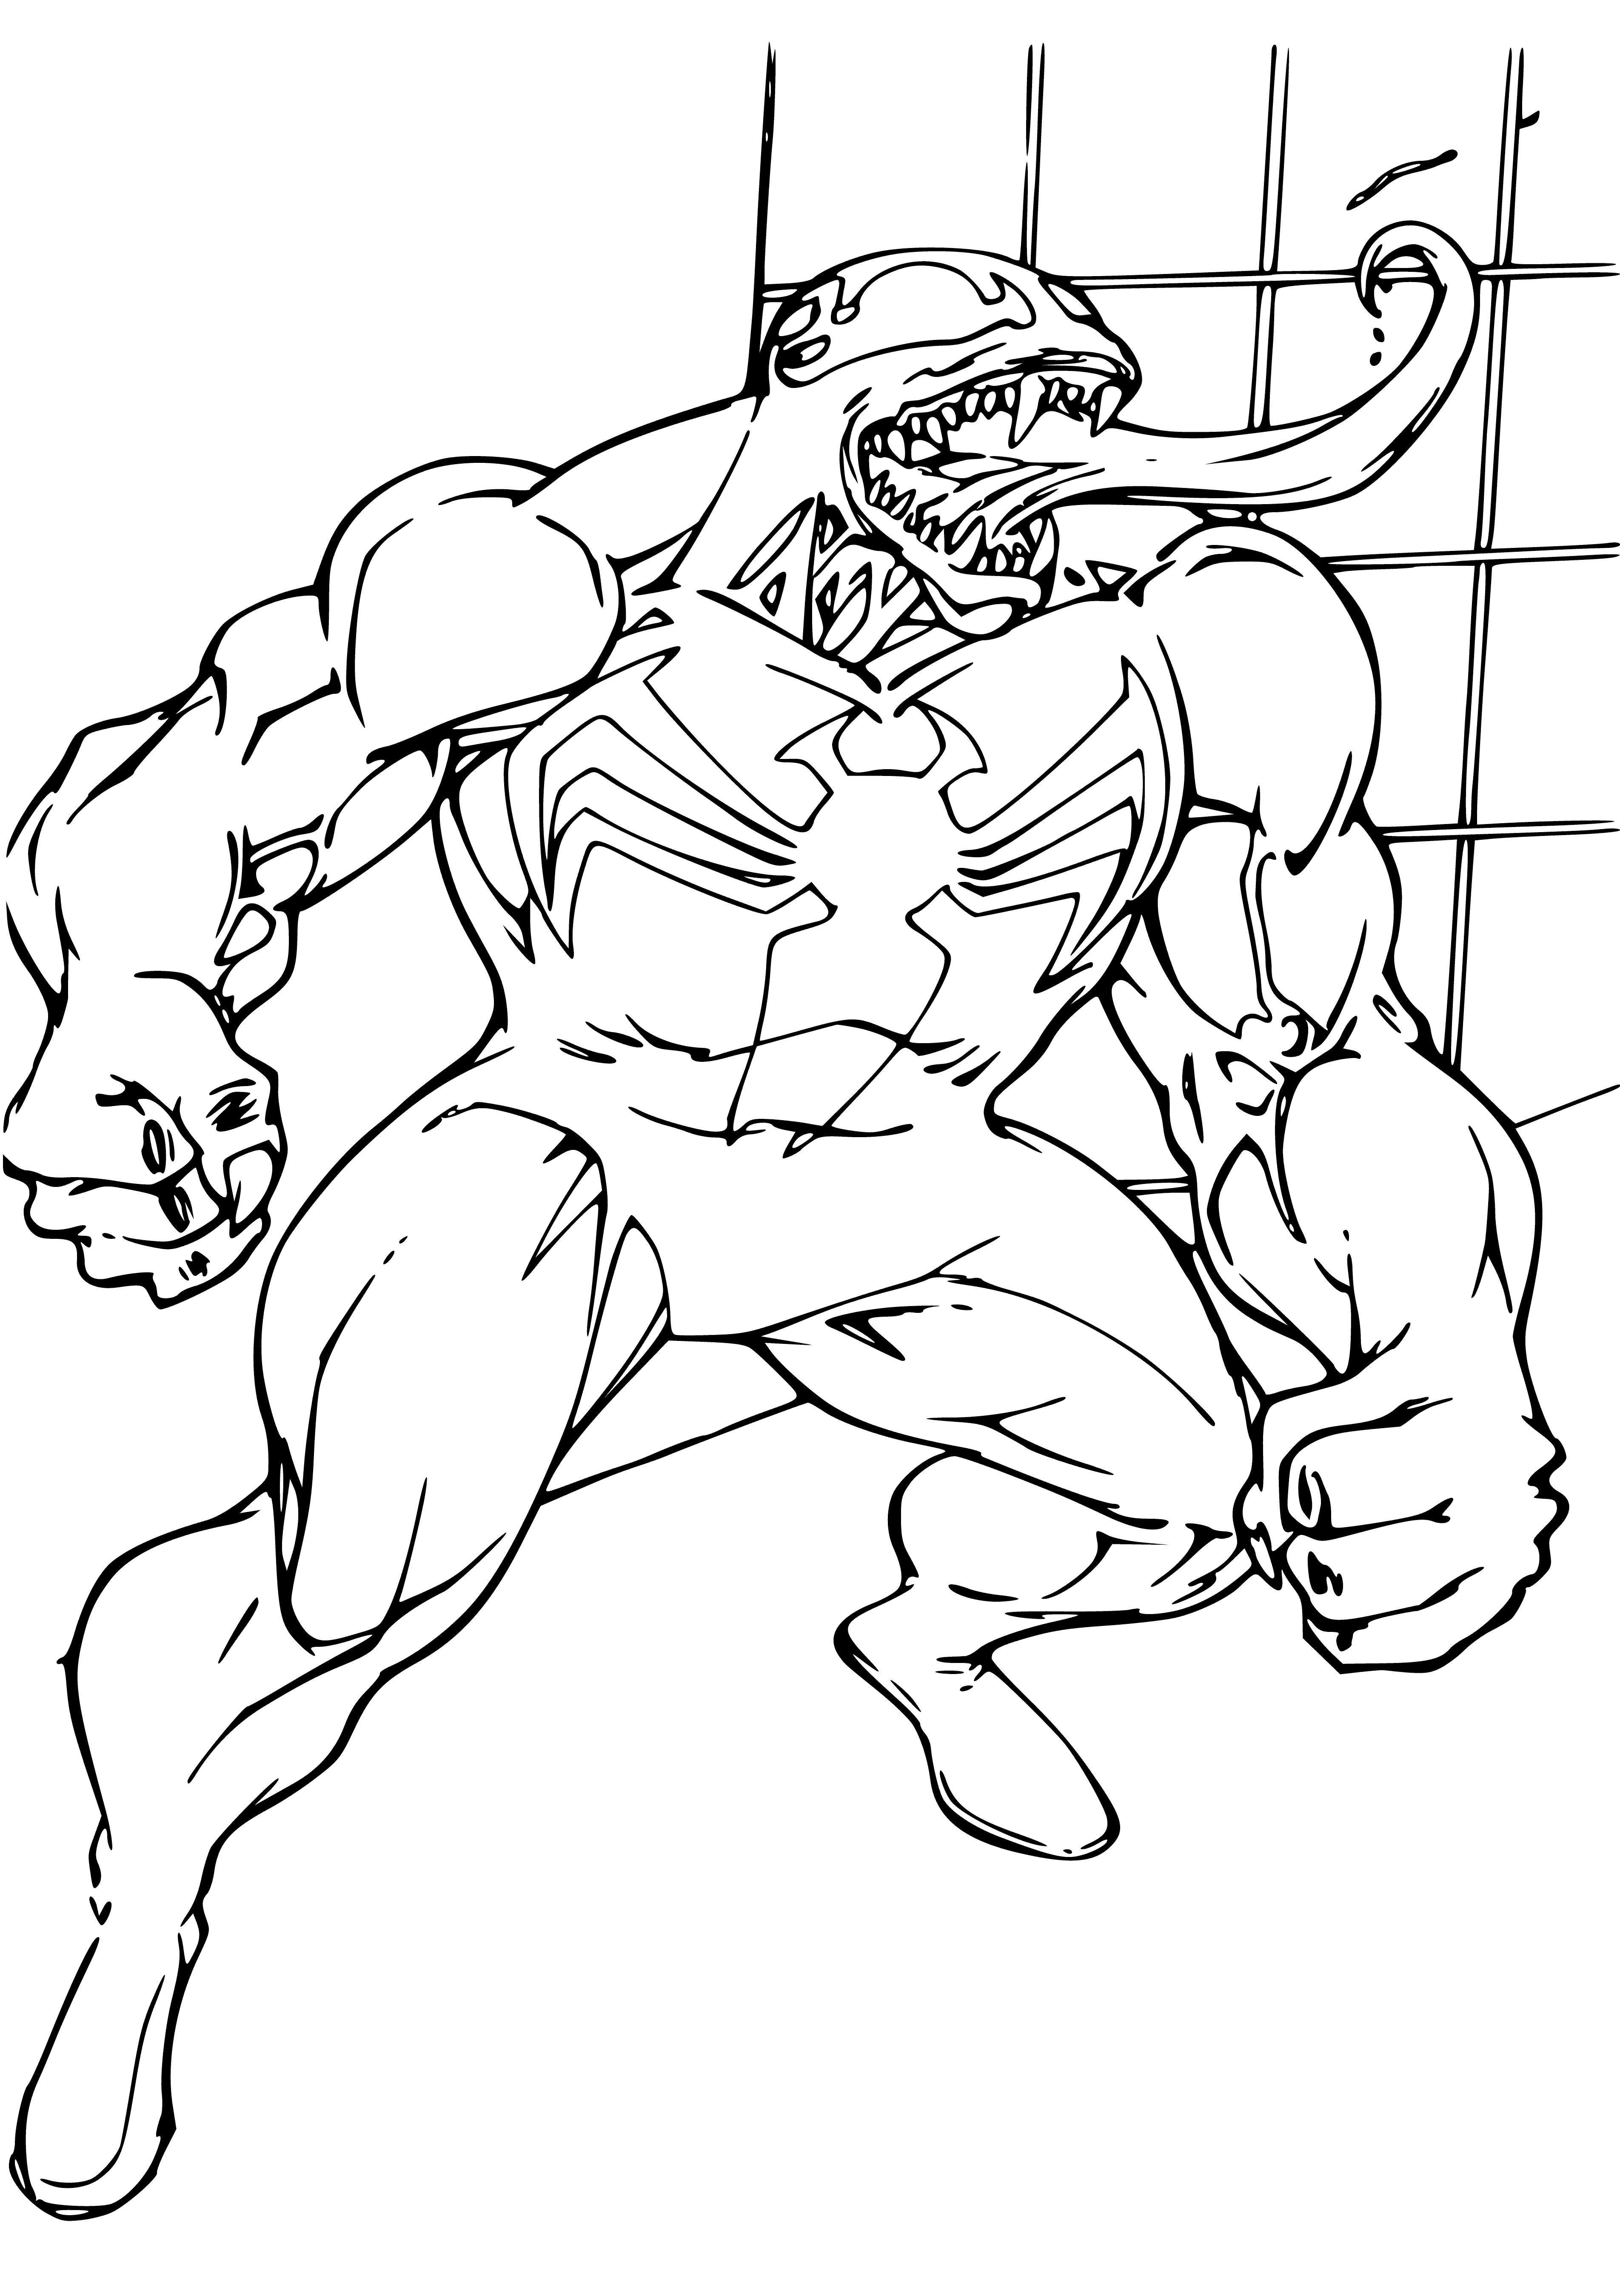 coloring page: Green Goblin stands ready to fight Spiderman, clutching pumpkin bomb & glider in jagged, horned mask & menacing glare.